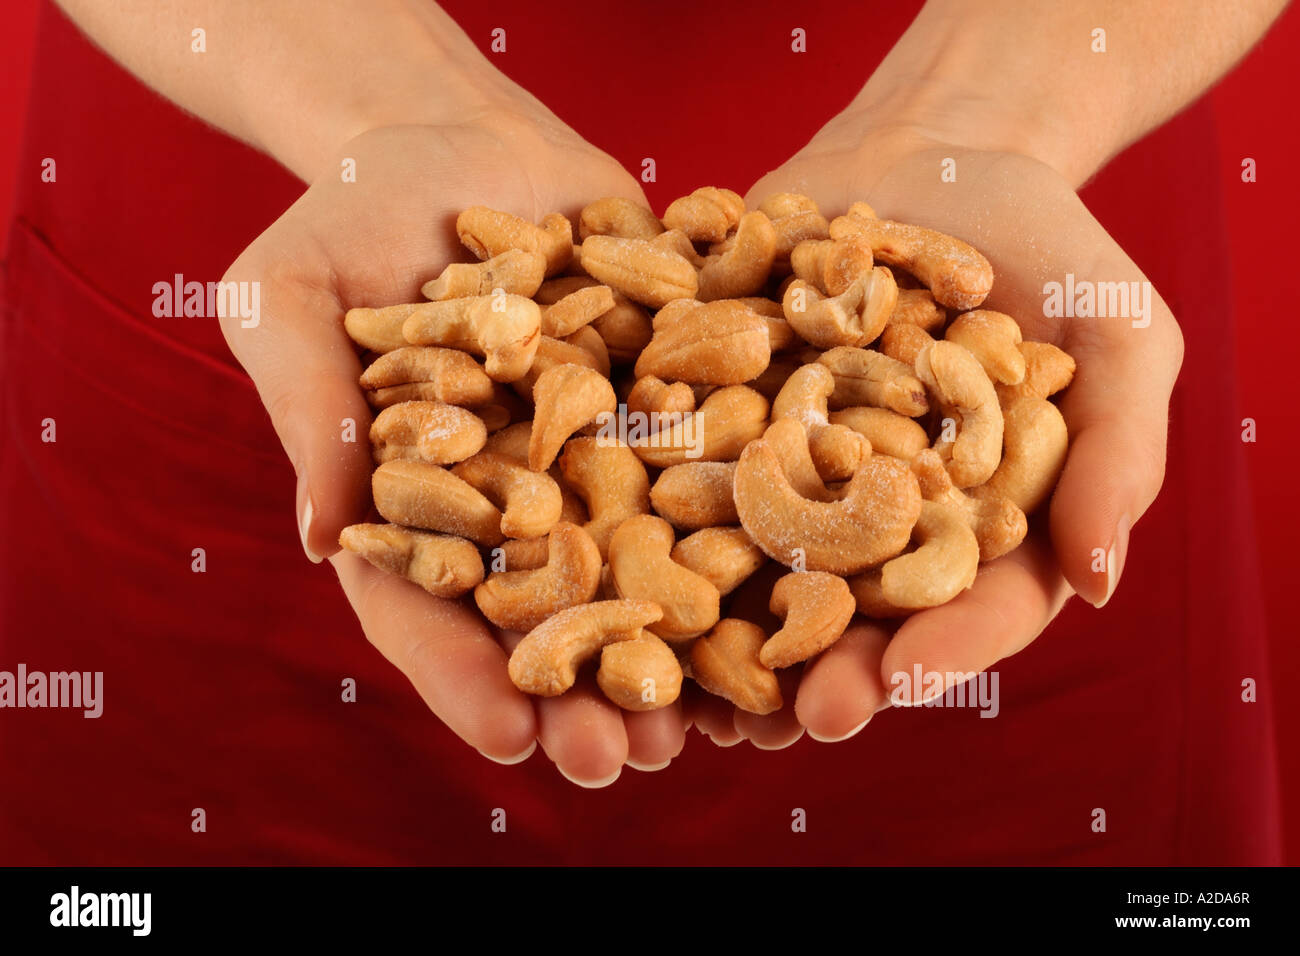 HANDFUL OF ROASTED CASHEW NUTS Stock Photo